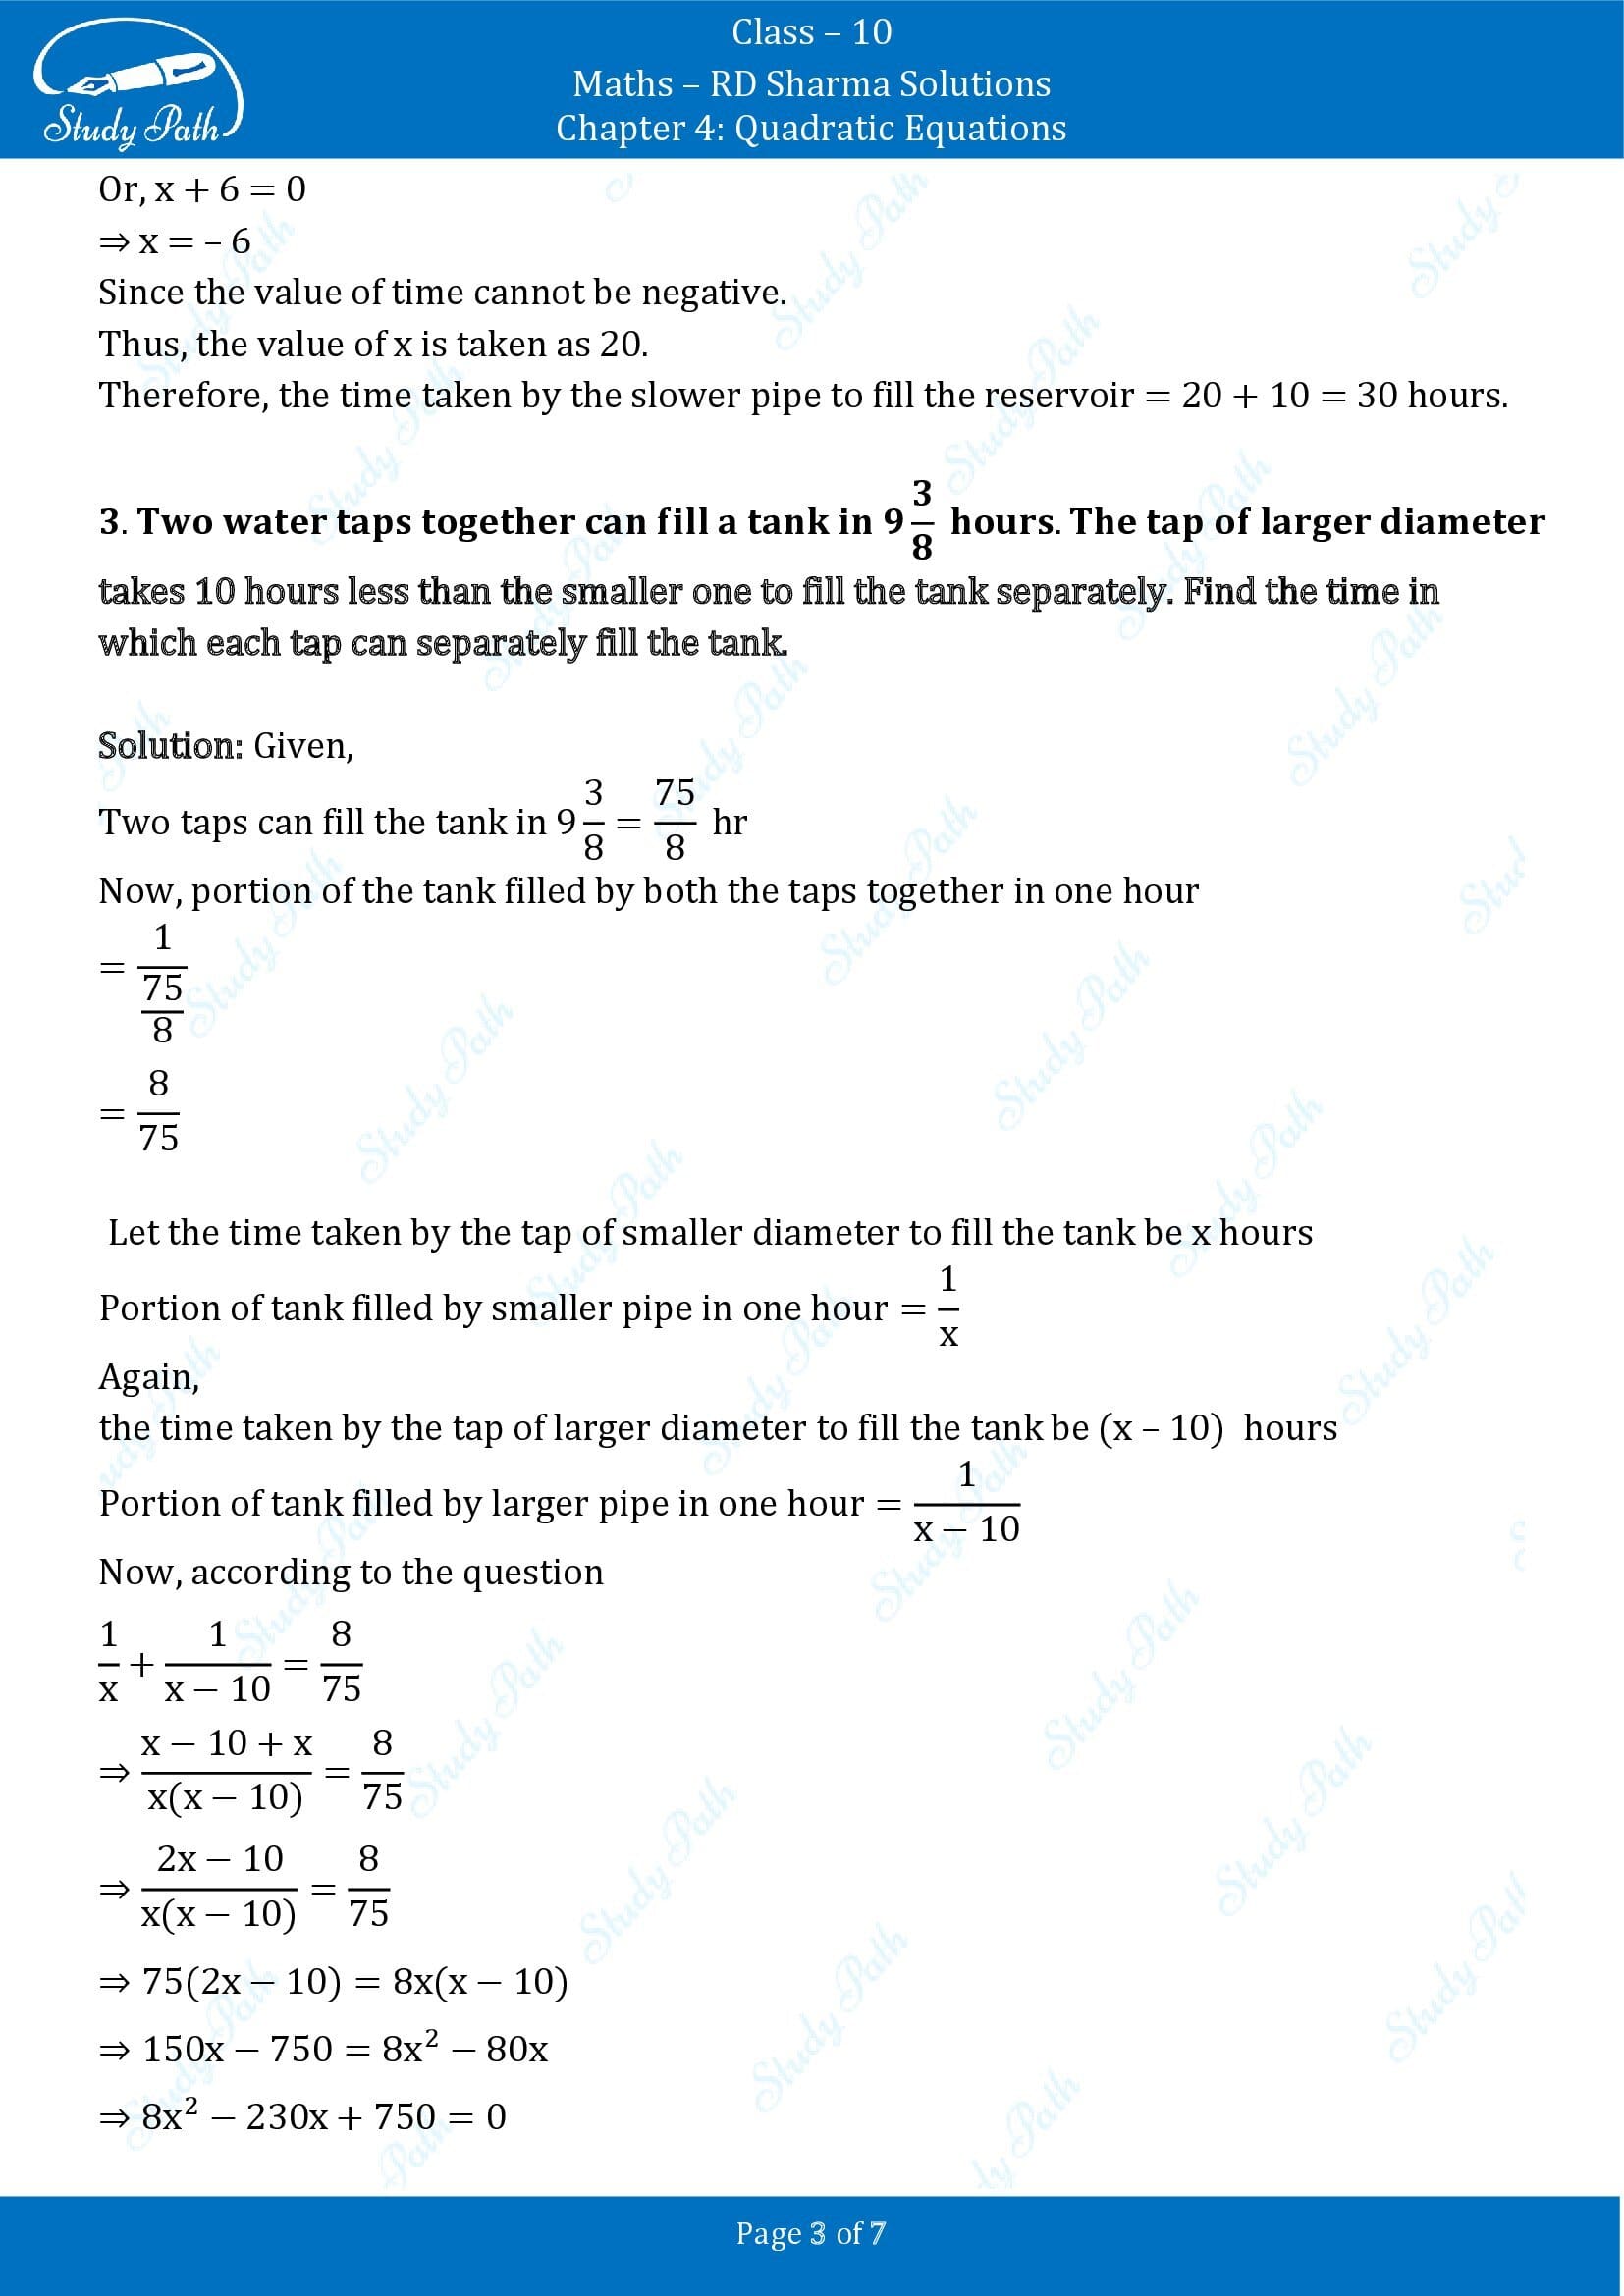 RD Sharma Solutions Class 10 Chapter 4 Quadratic Equations Exercise 4.12 00003